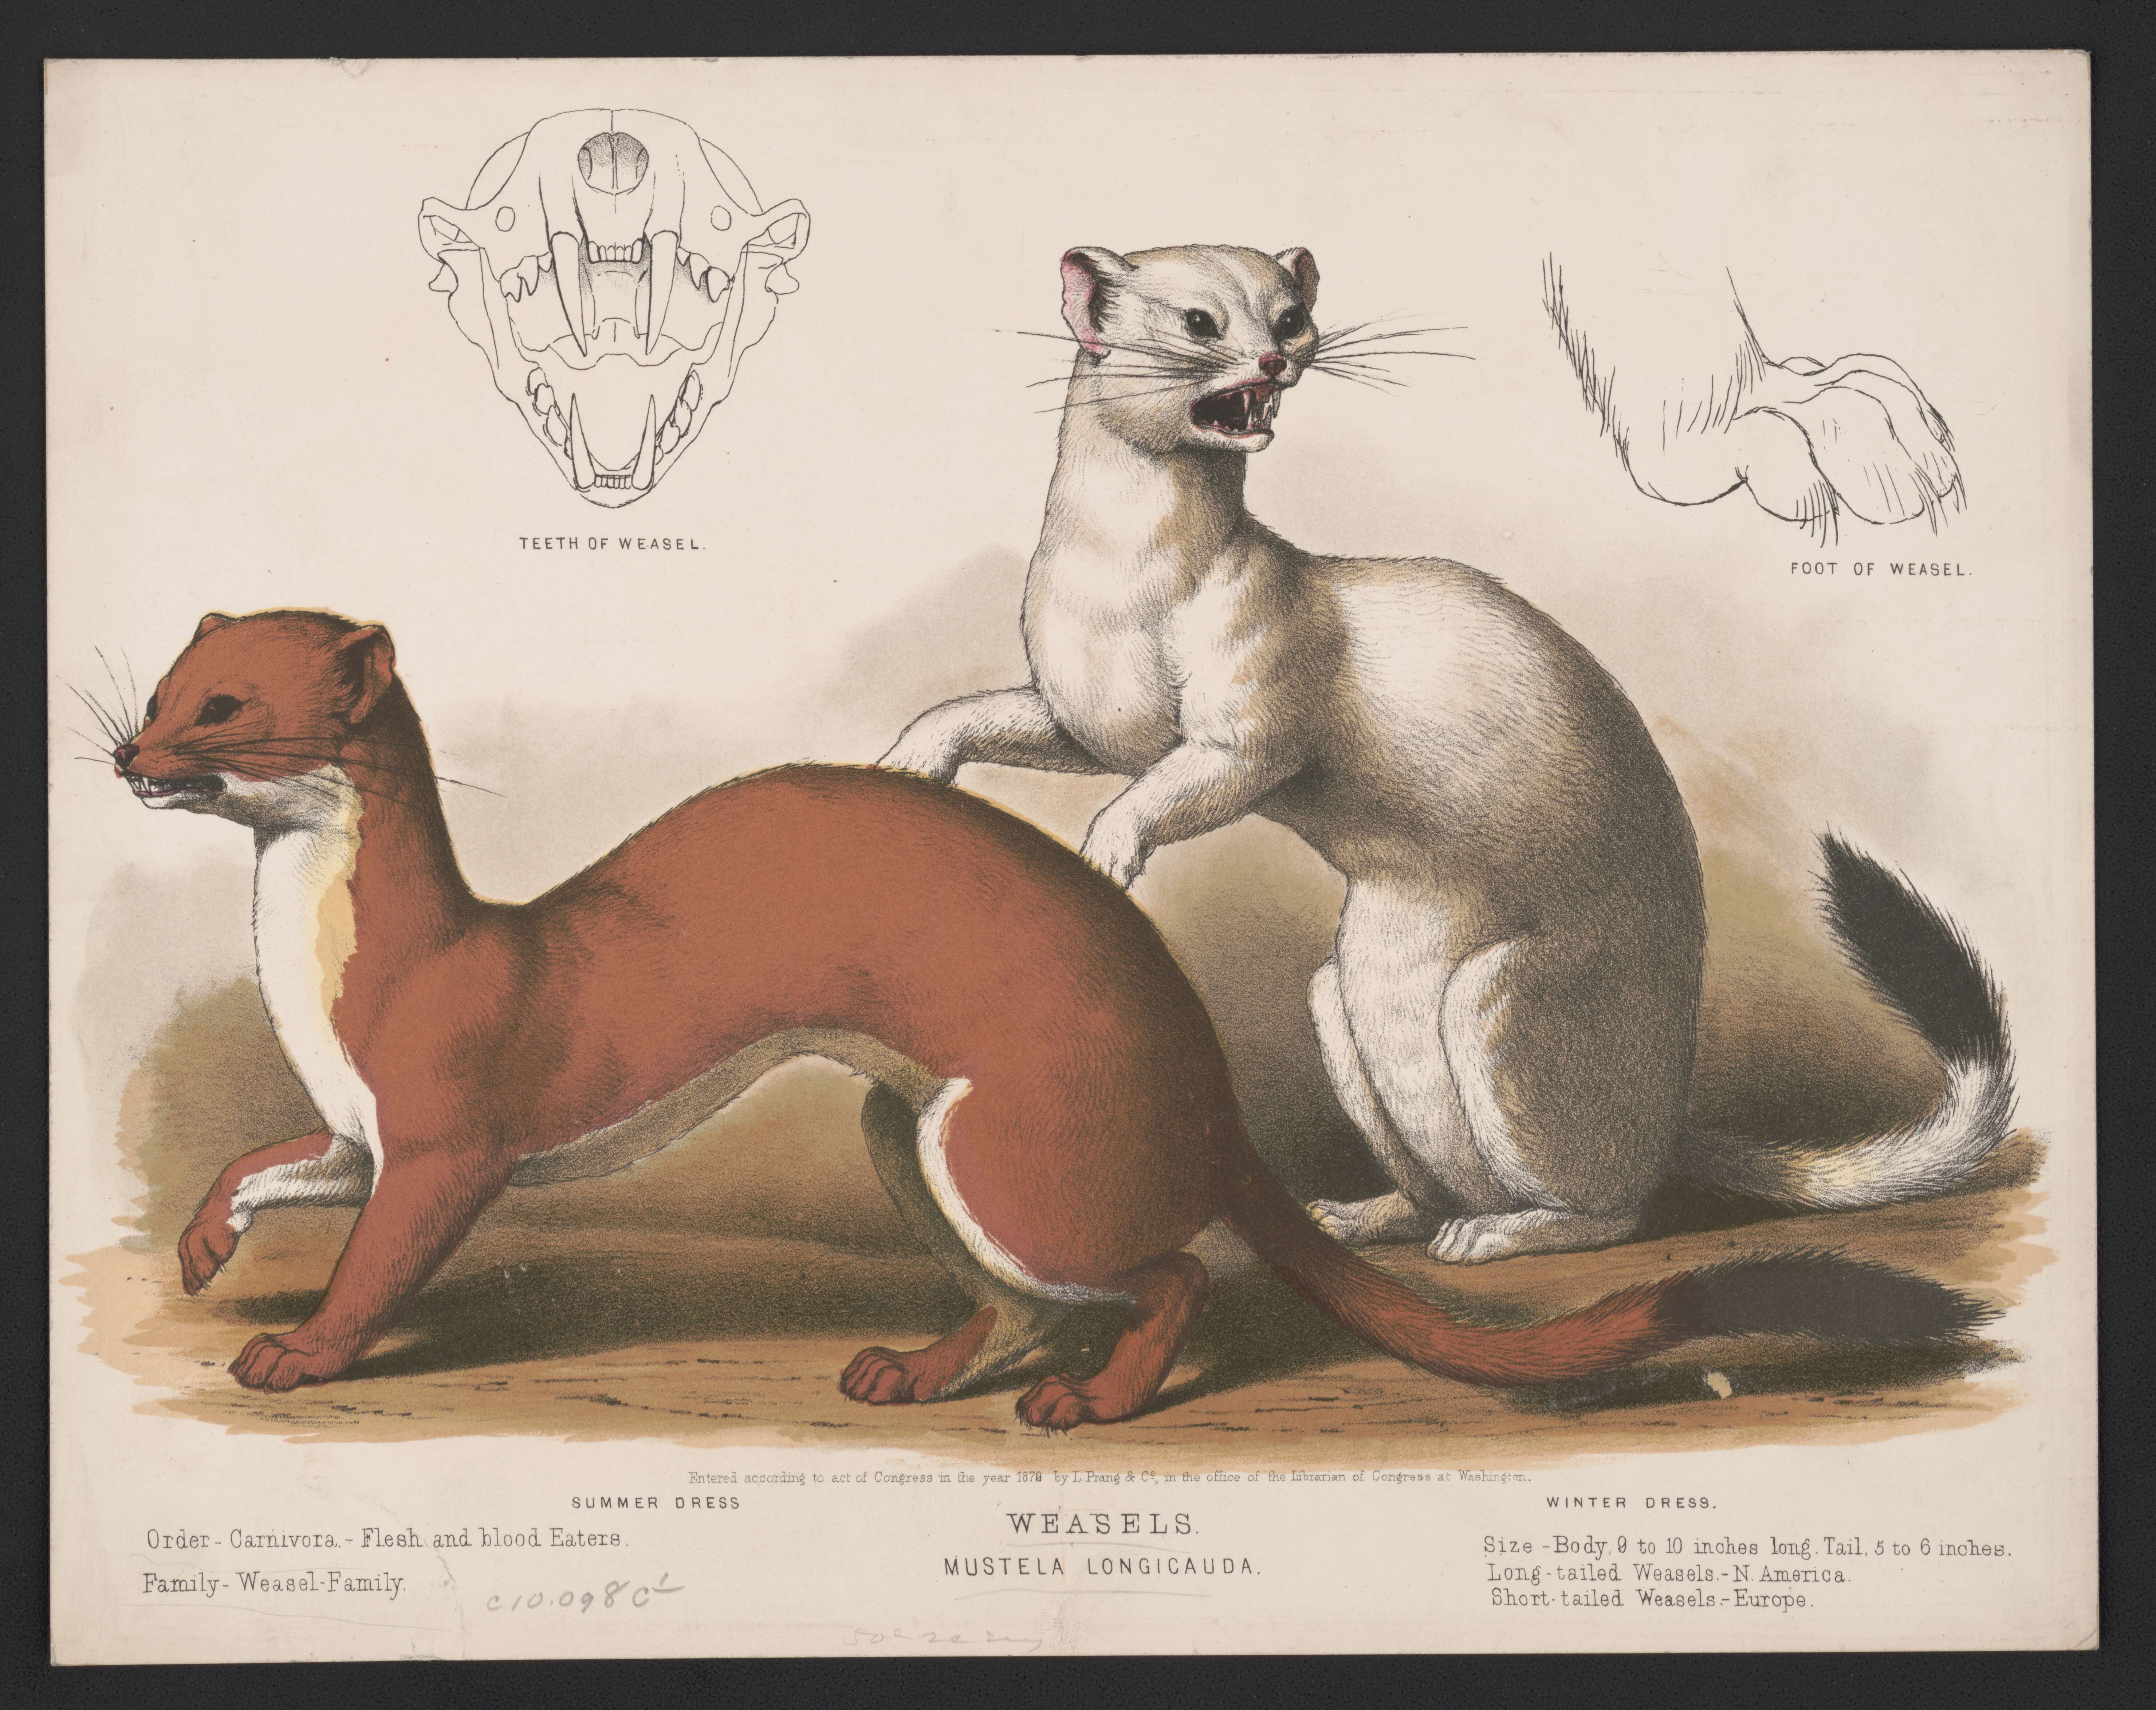 Image of Long-tailed Weasel